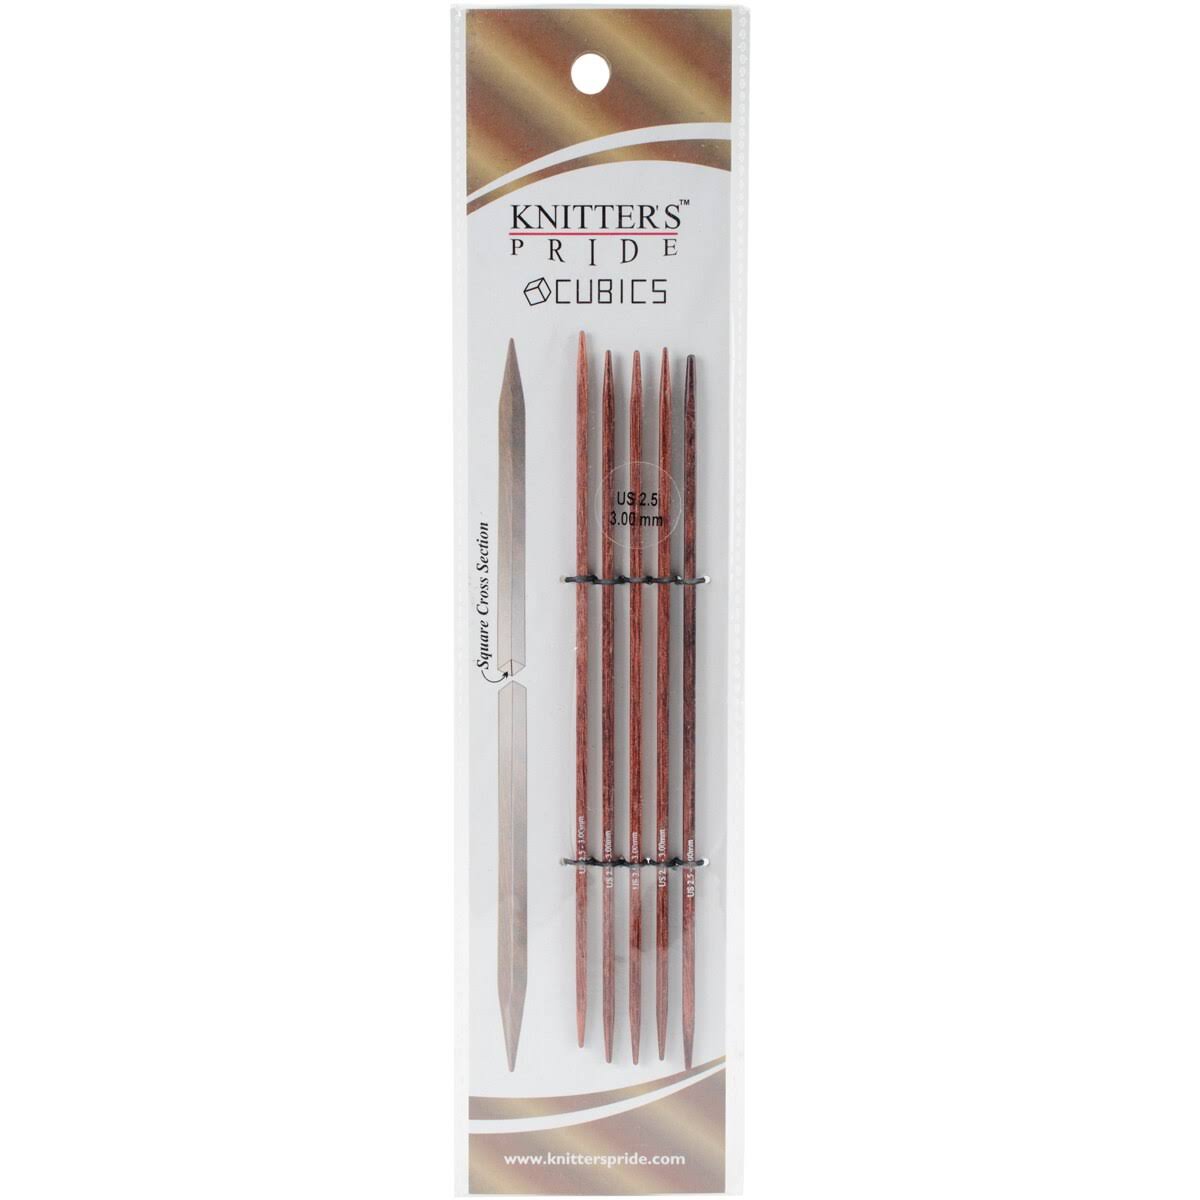 Knitter's Pride KP300105 2.5/3mm Cubics Double Pointed Needles, 6"